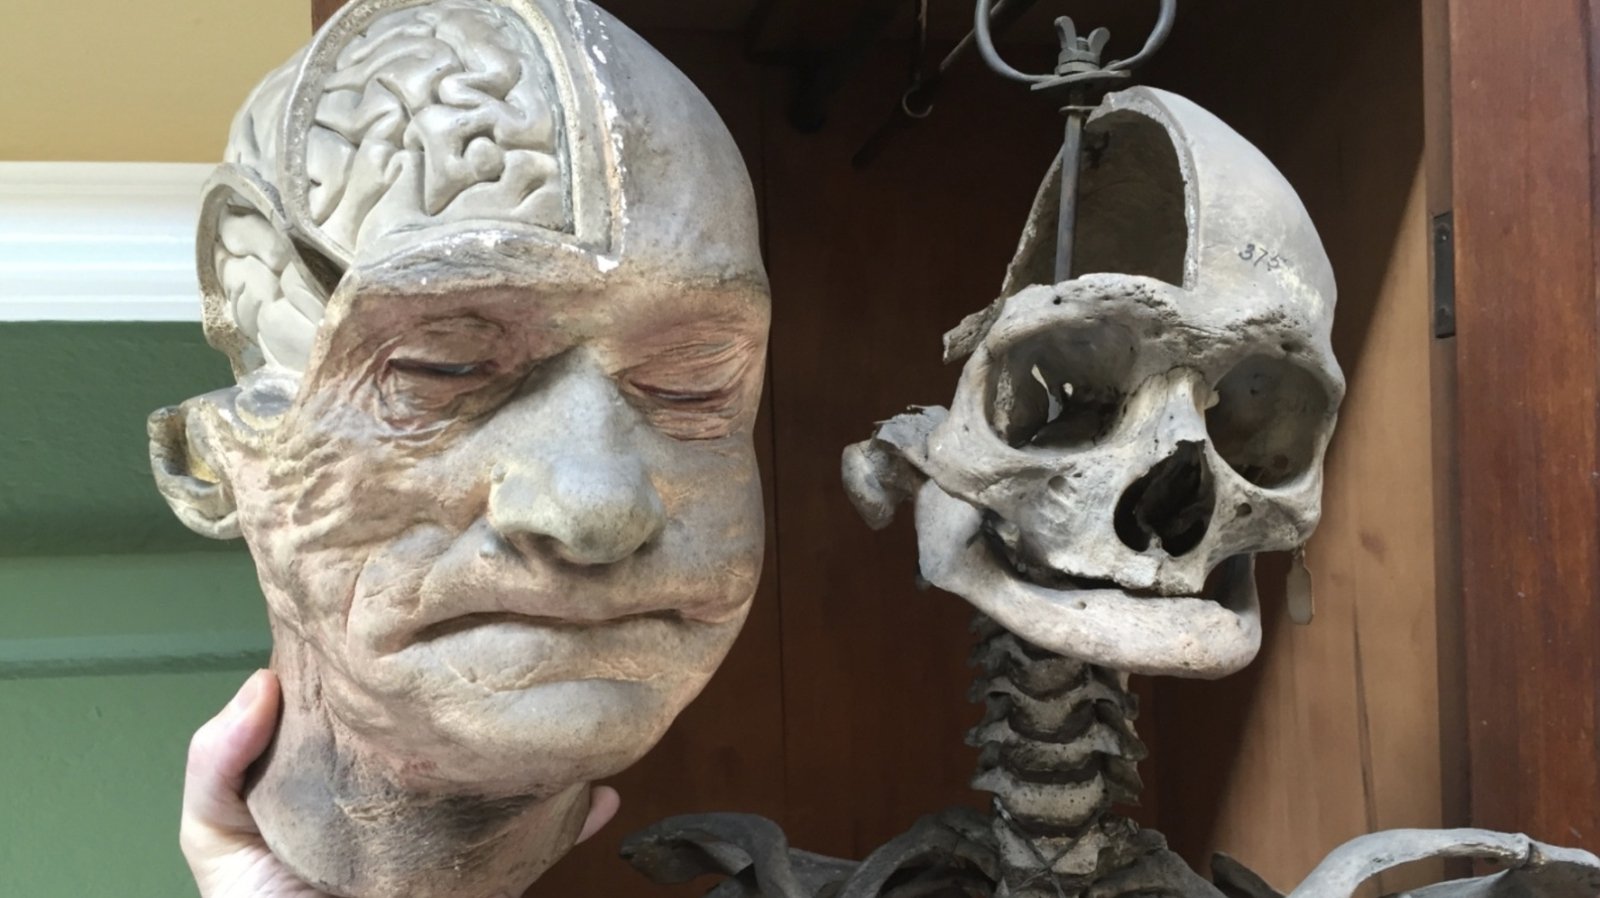 Image - Plaster cast and skeleton of centenarian James Conway. Photo by Siobhan Ward.